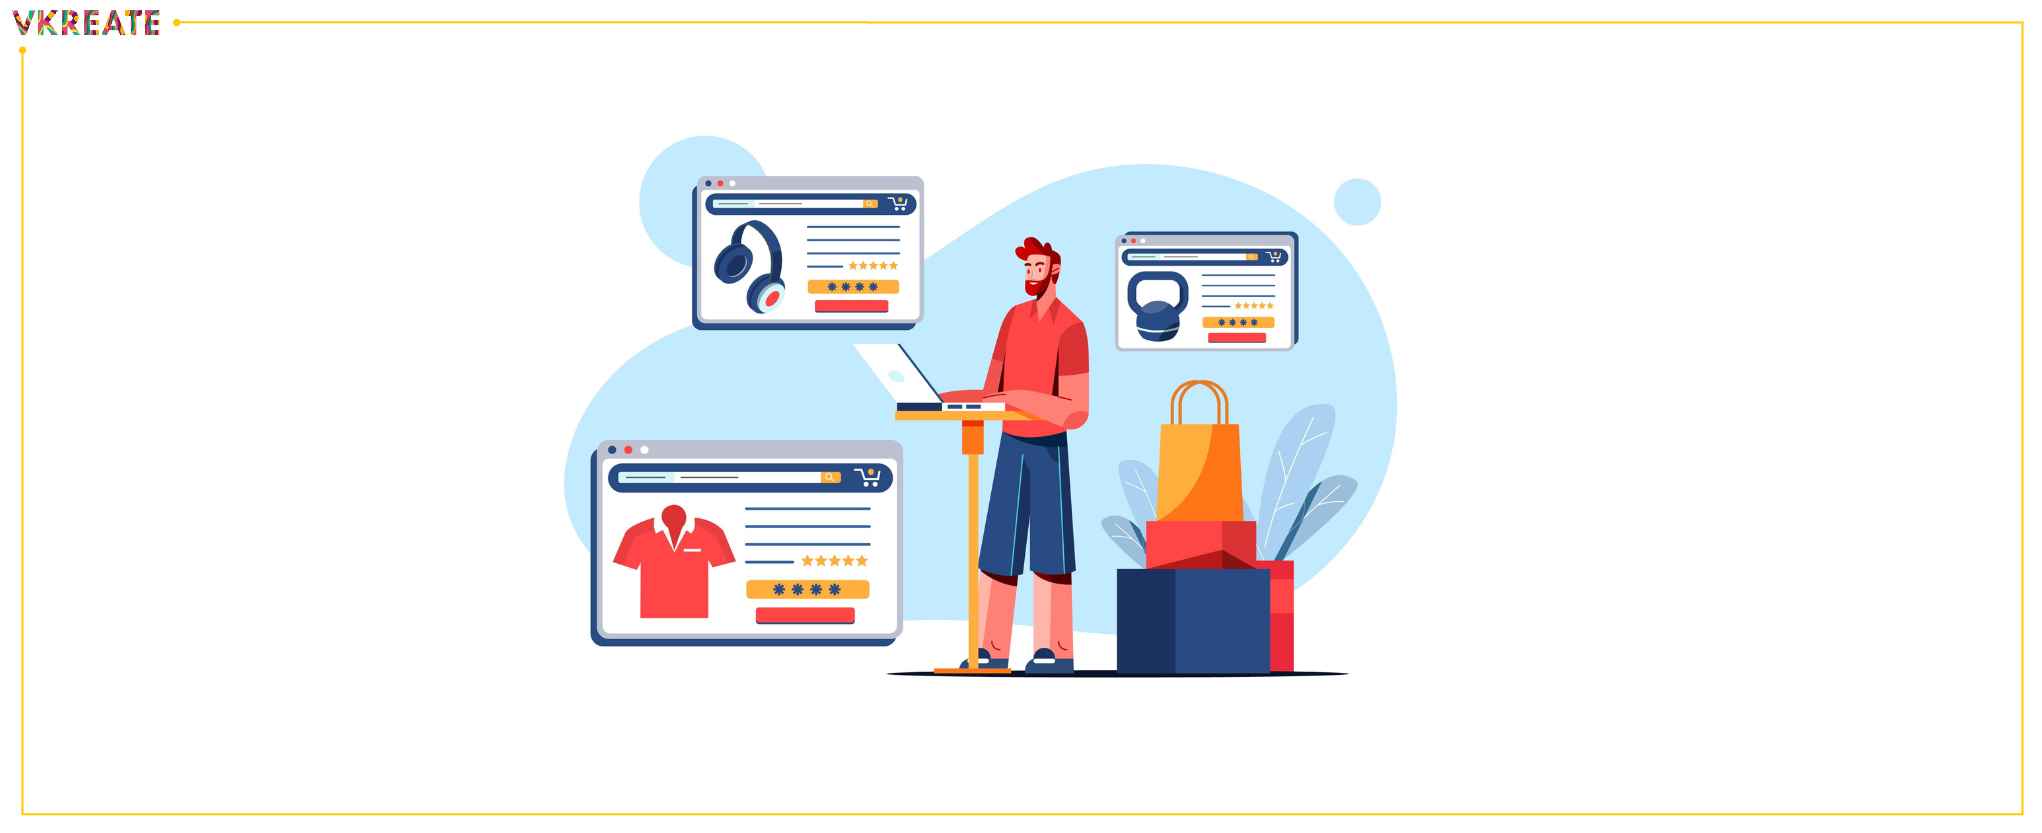 10 Profitable E-commerce Business Ideas to Consider in 2023